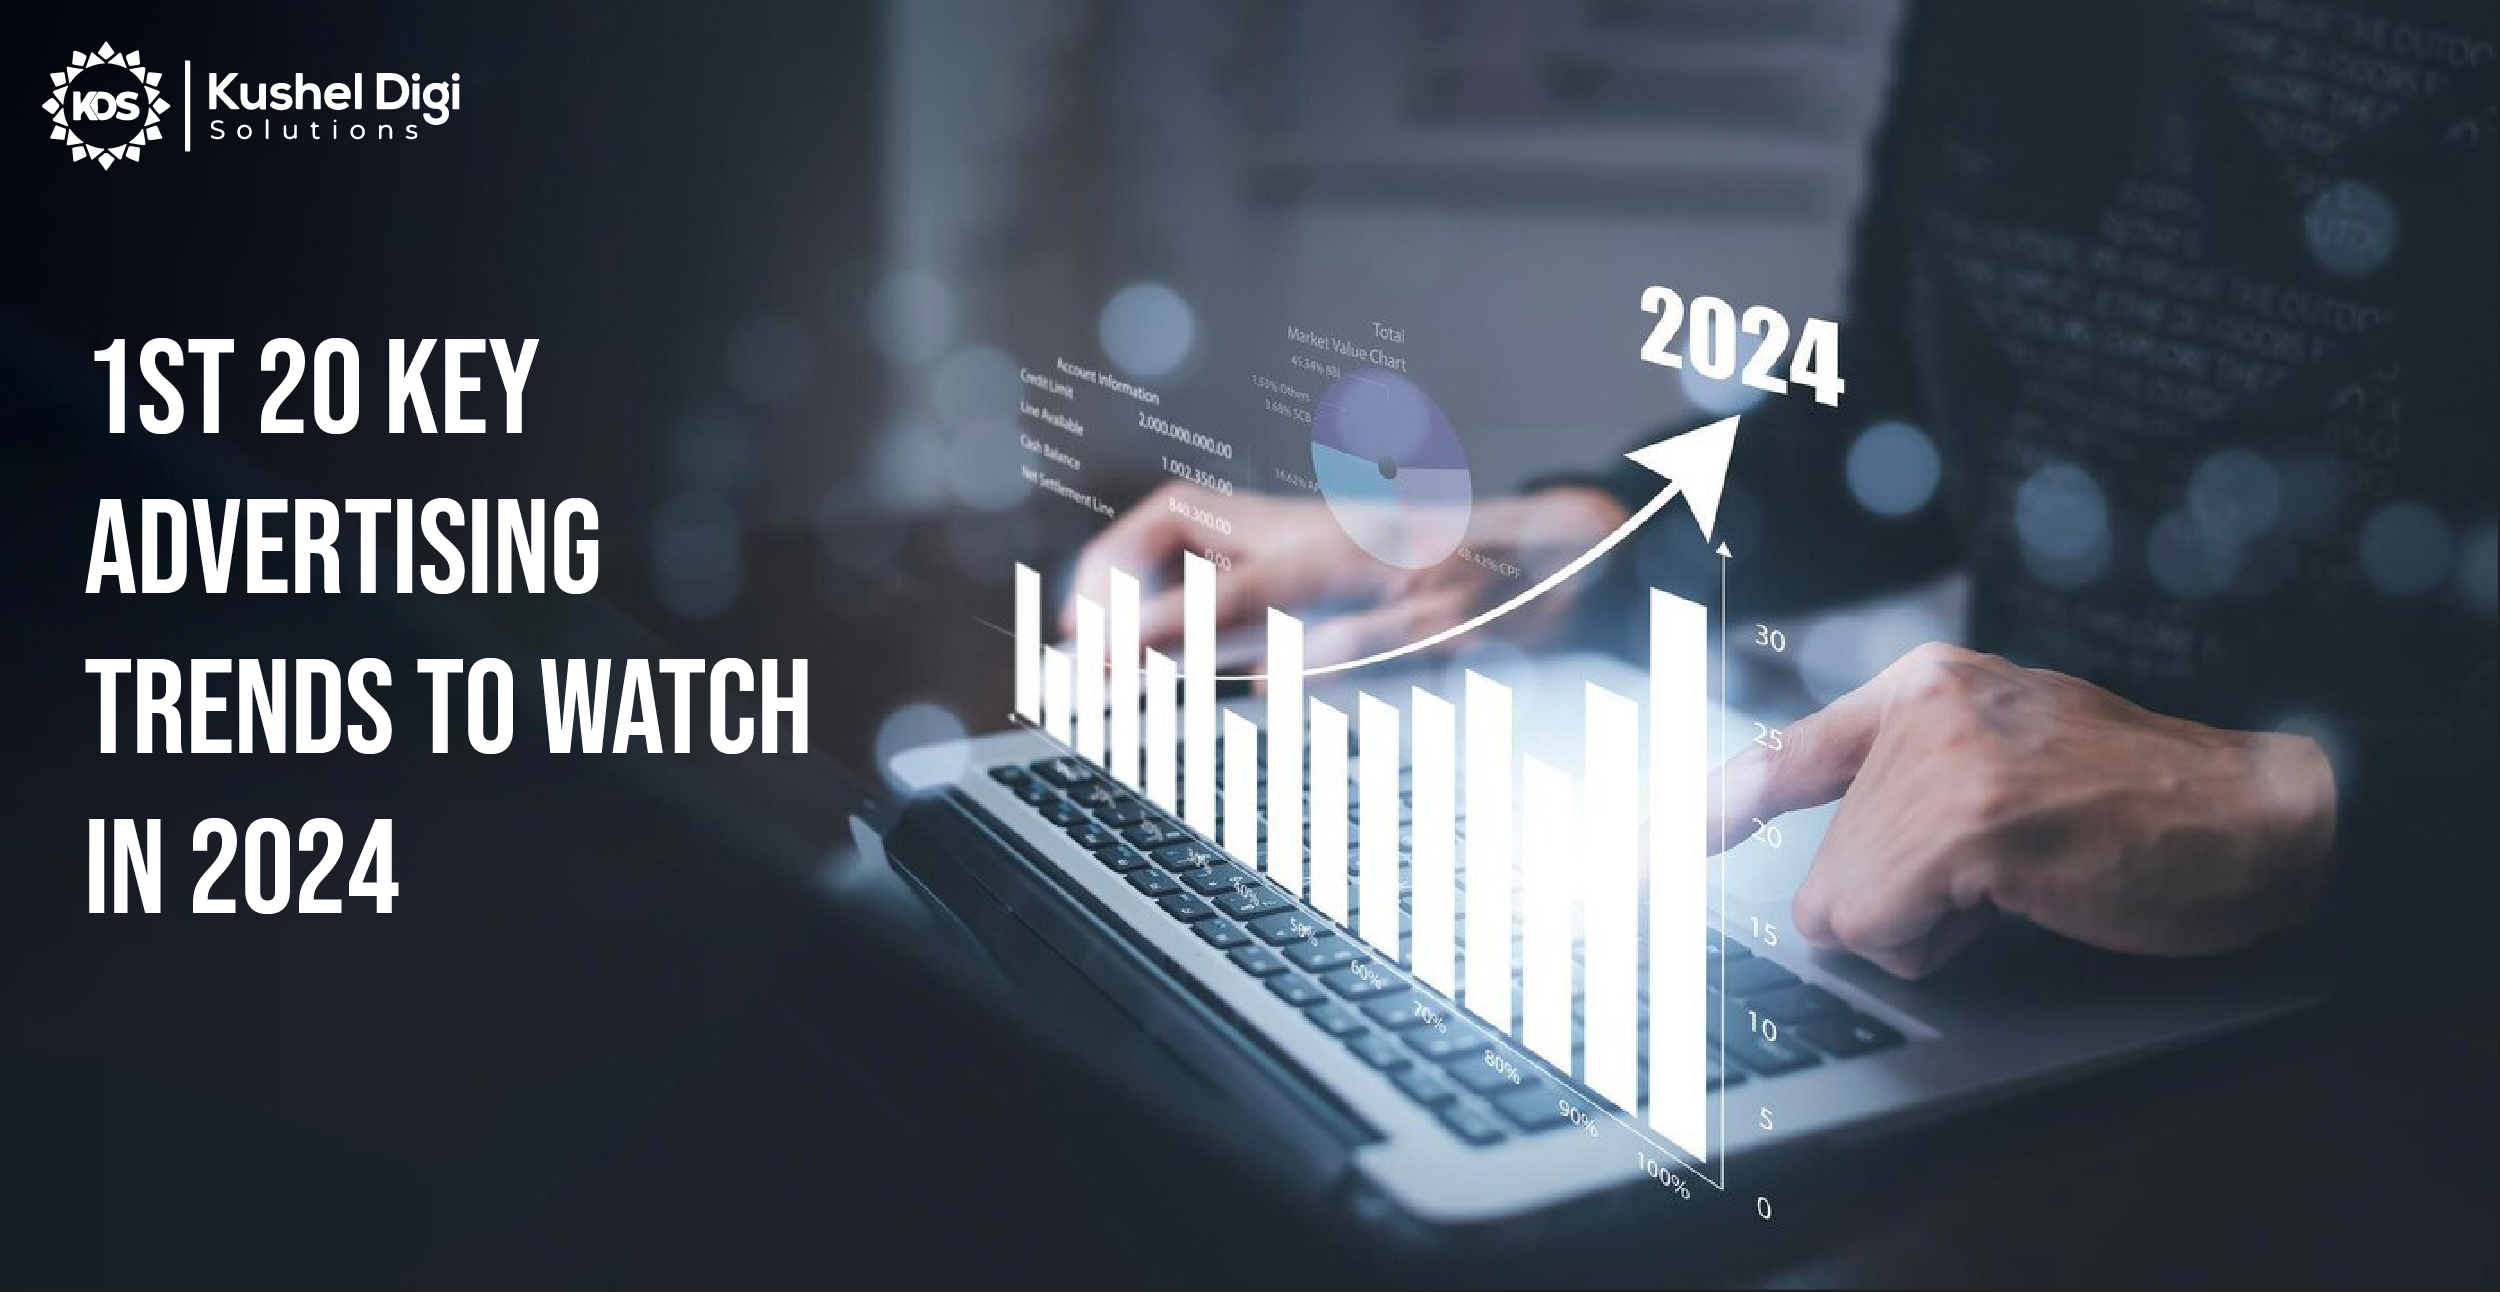  20 ADVERTISING TRENDS TO WATCH IN 2024